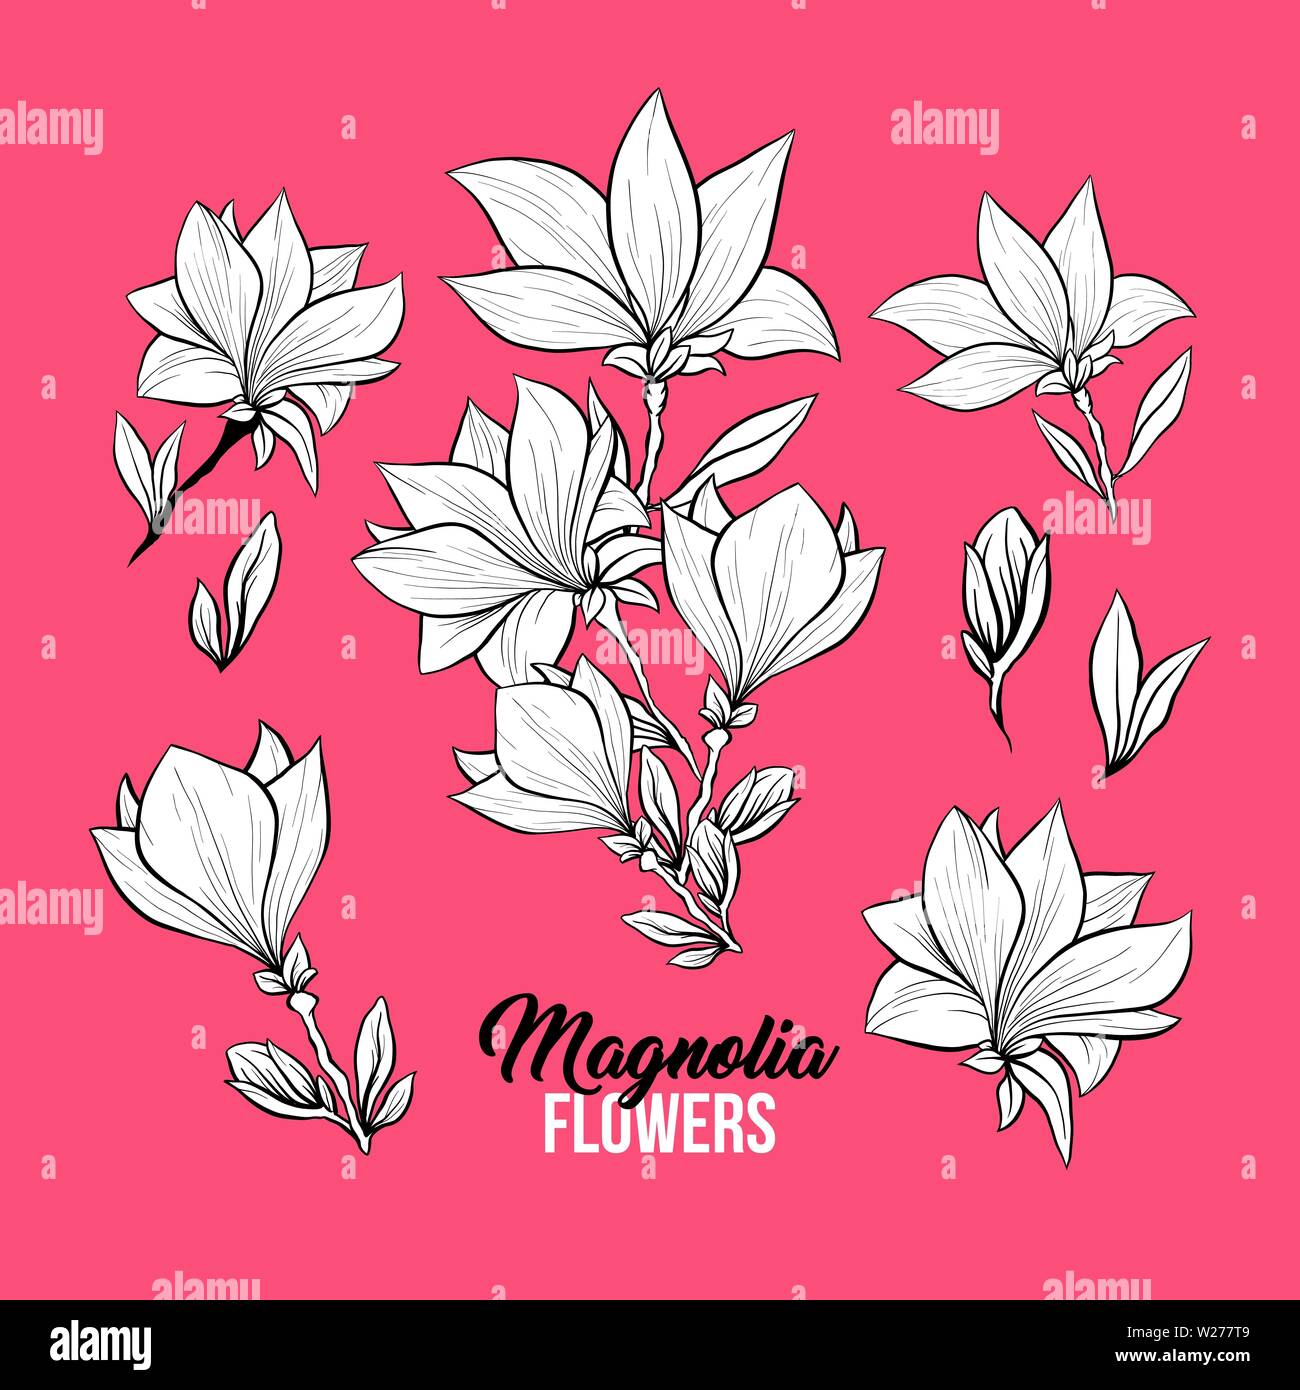 Magnolia blossom freehand vector illustrations set. Japanese flower petals white on pink background. Blooming plant and buds black and white engravings. Postcard, greeting card design elements Stock Vector